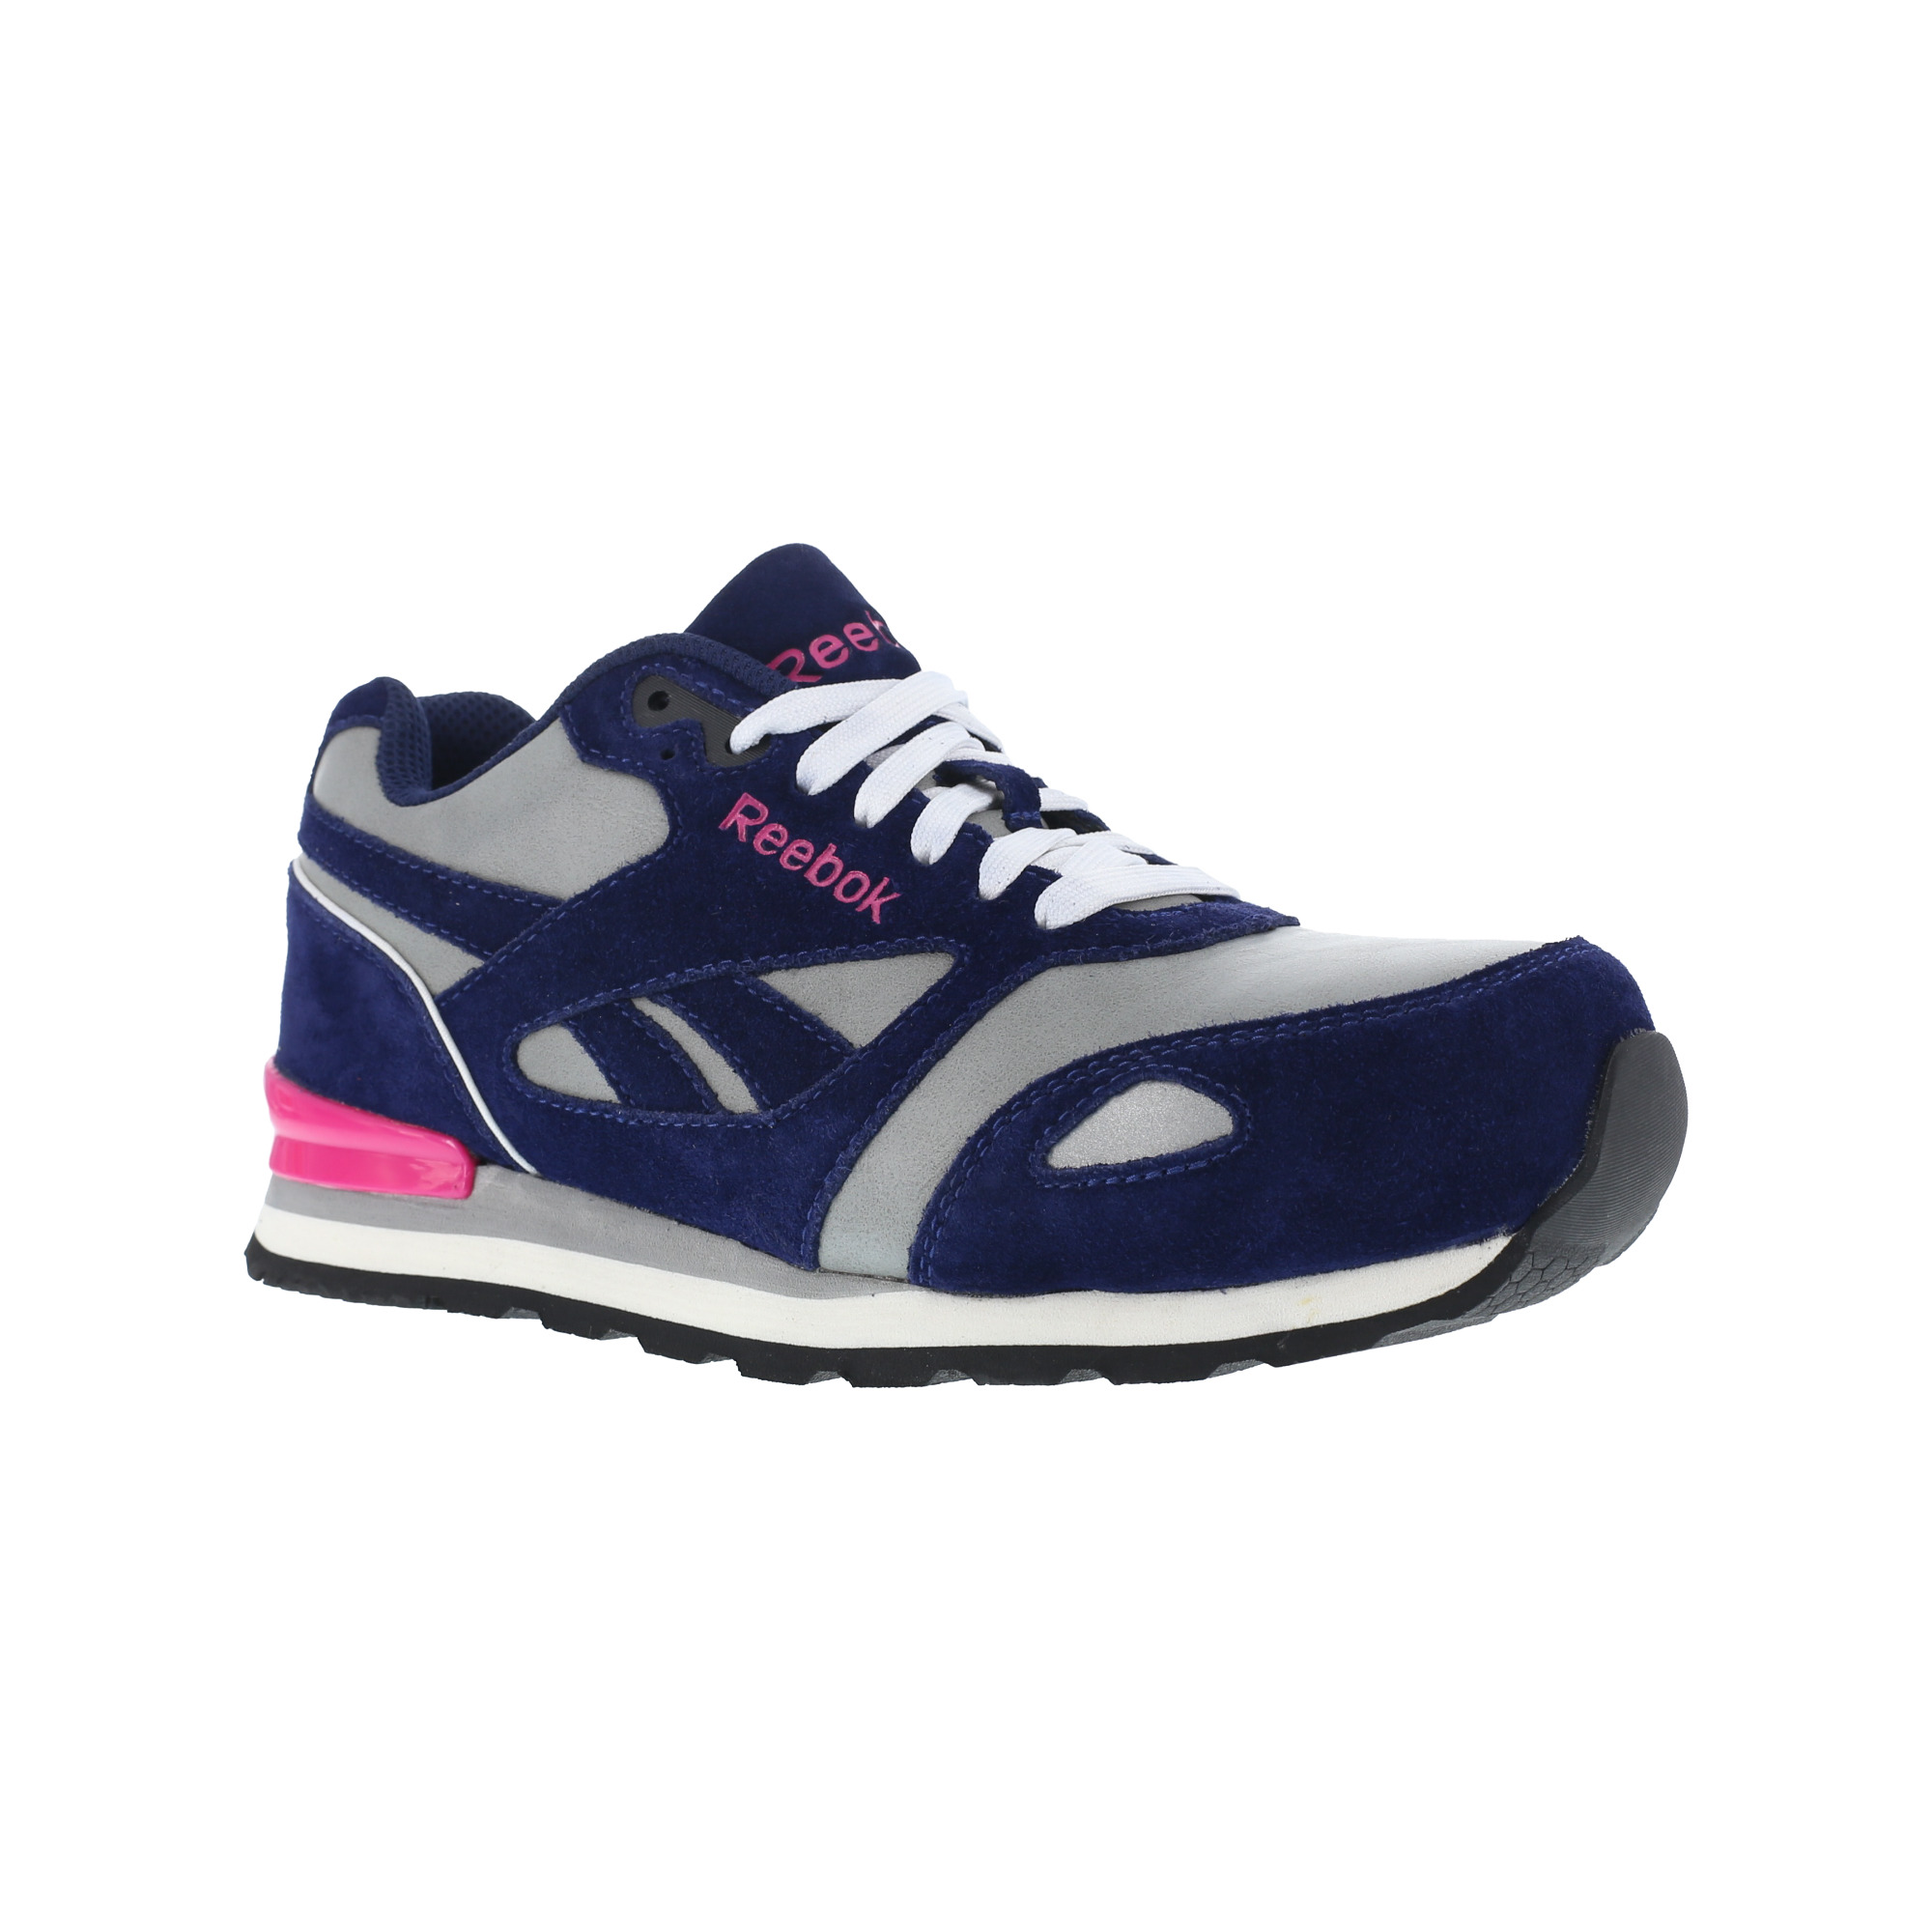 Reebok Work Women's RB976 Prelaris Blue with Grey and Pink Trim Retro Jogger with Composite Toe